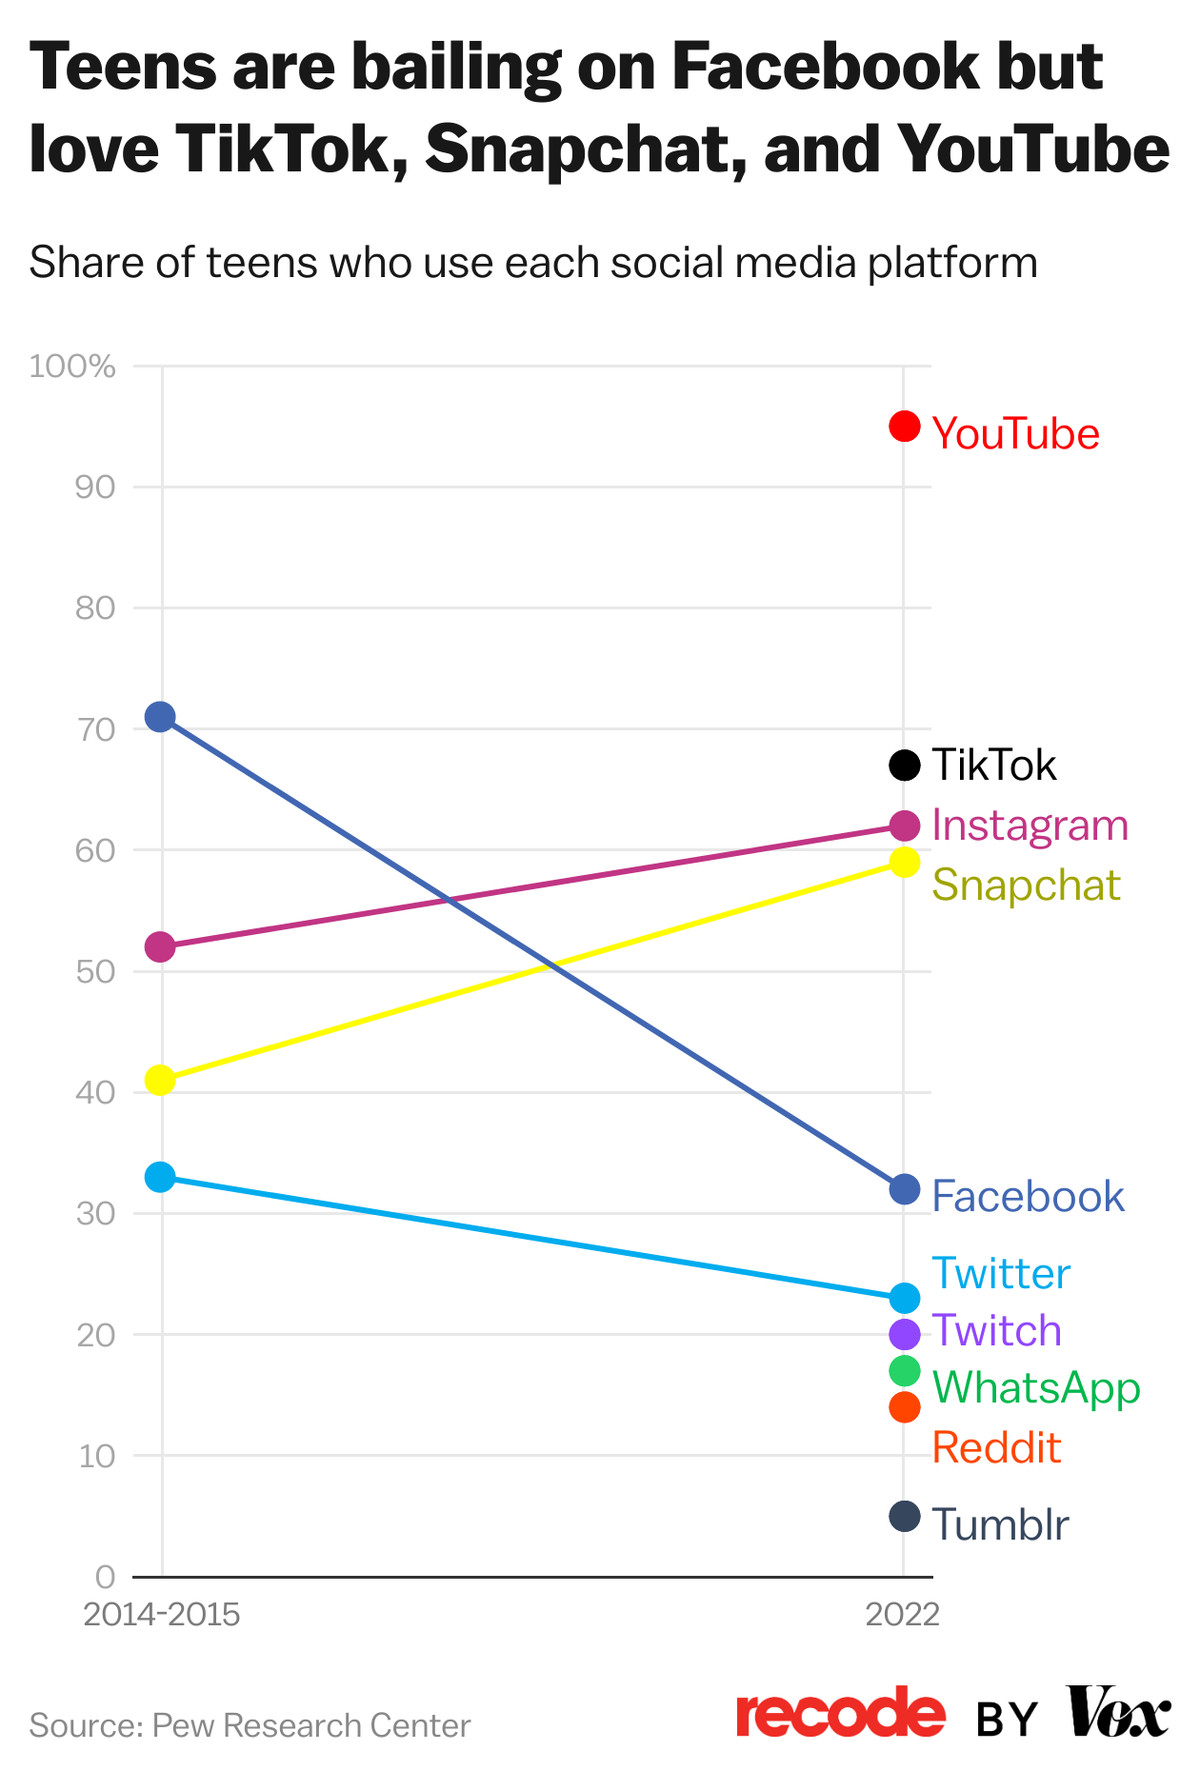 Chart: Share of teens who use each social media platform. Teens are bailing on Facebook but love TikTok, Snapchat, and YouTube 